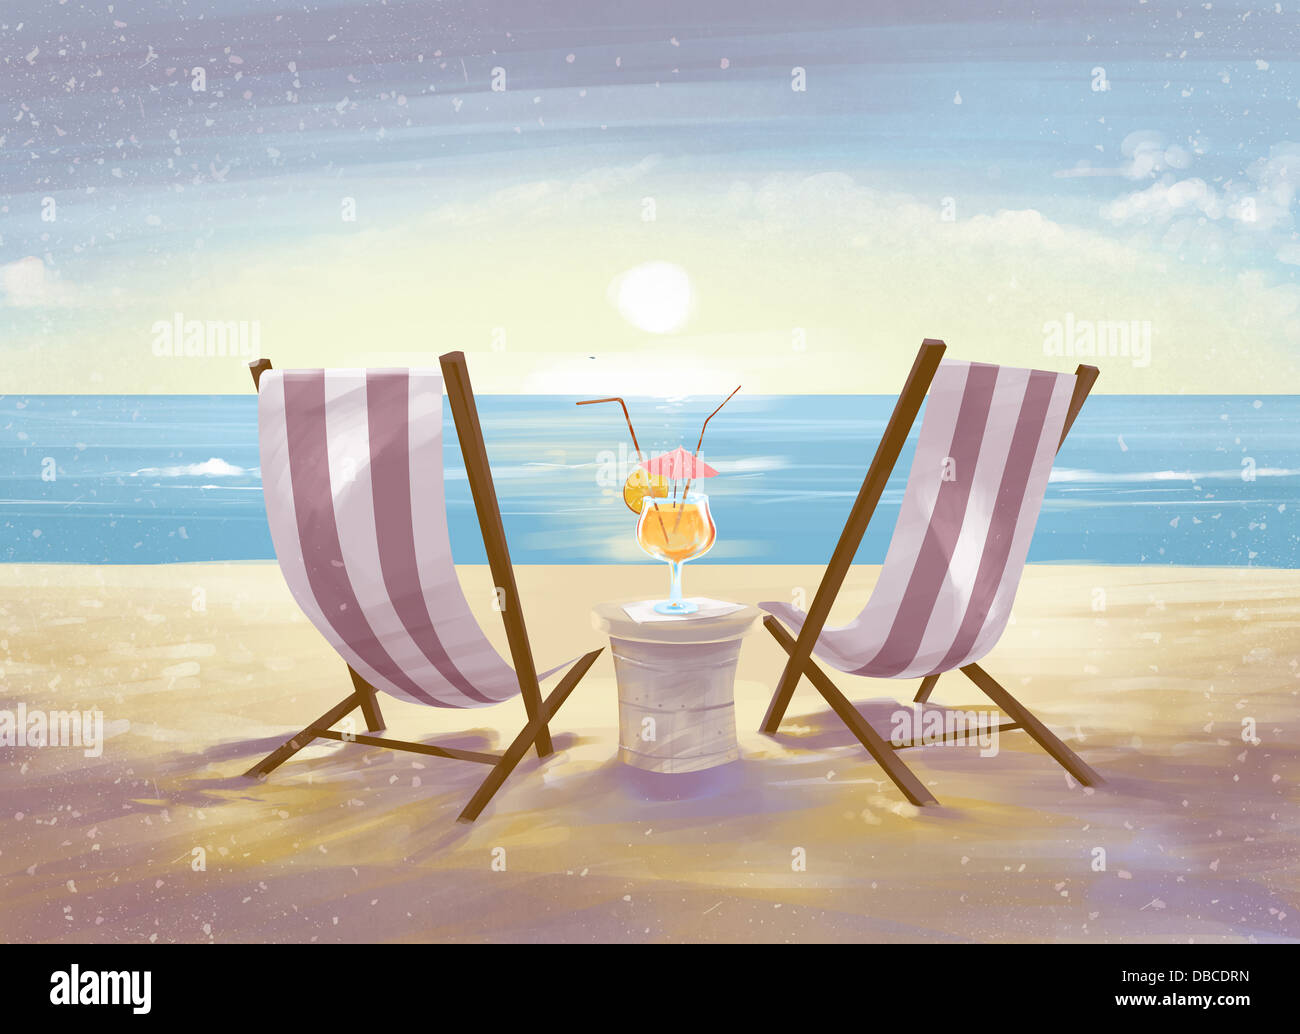 Illustration of deck chairs on beach Stock Photo